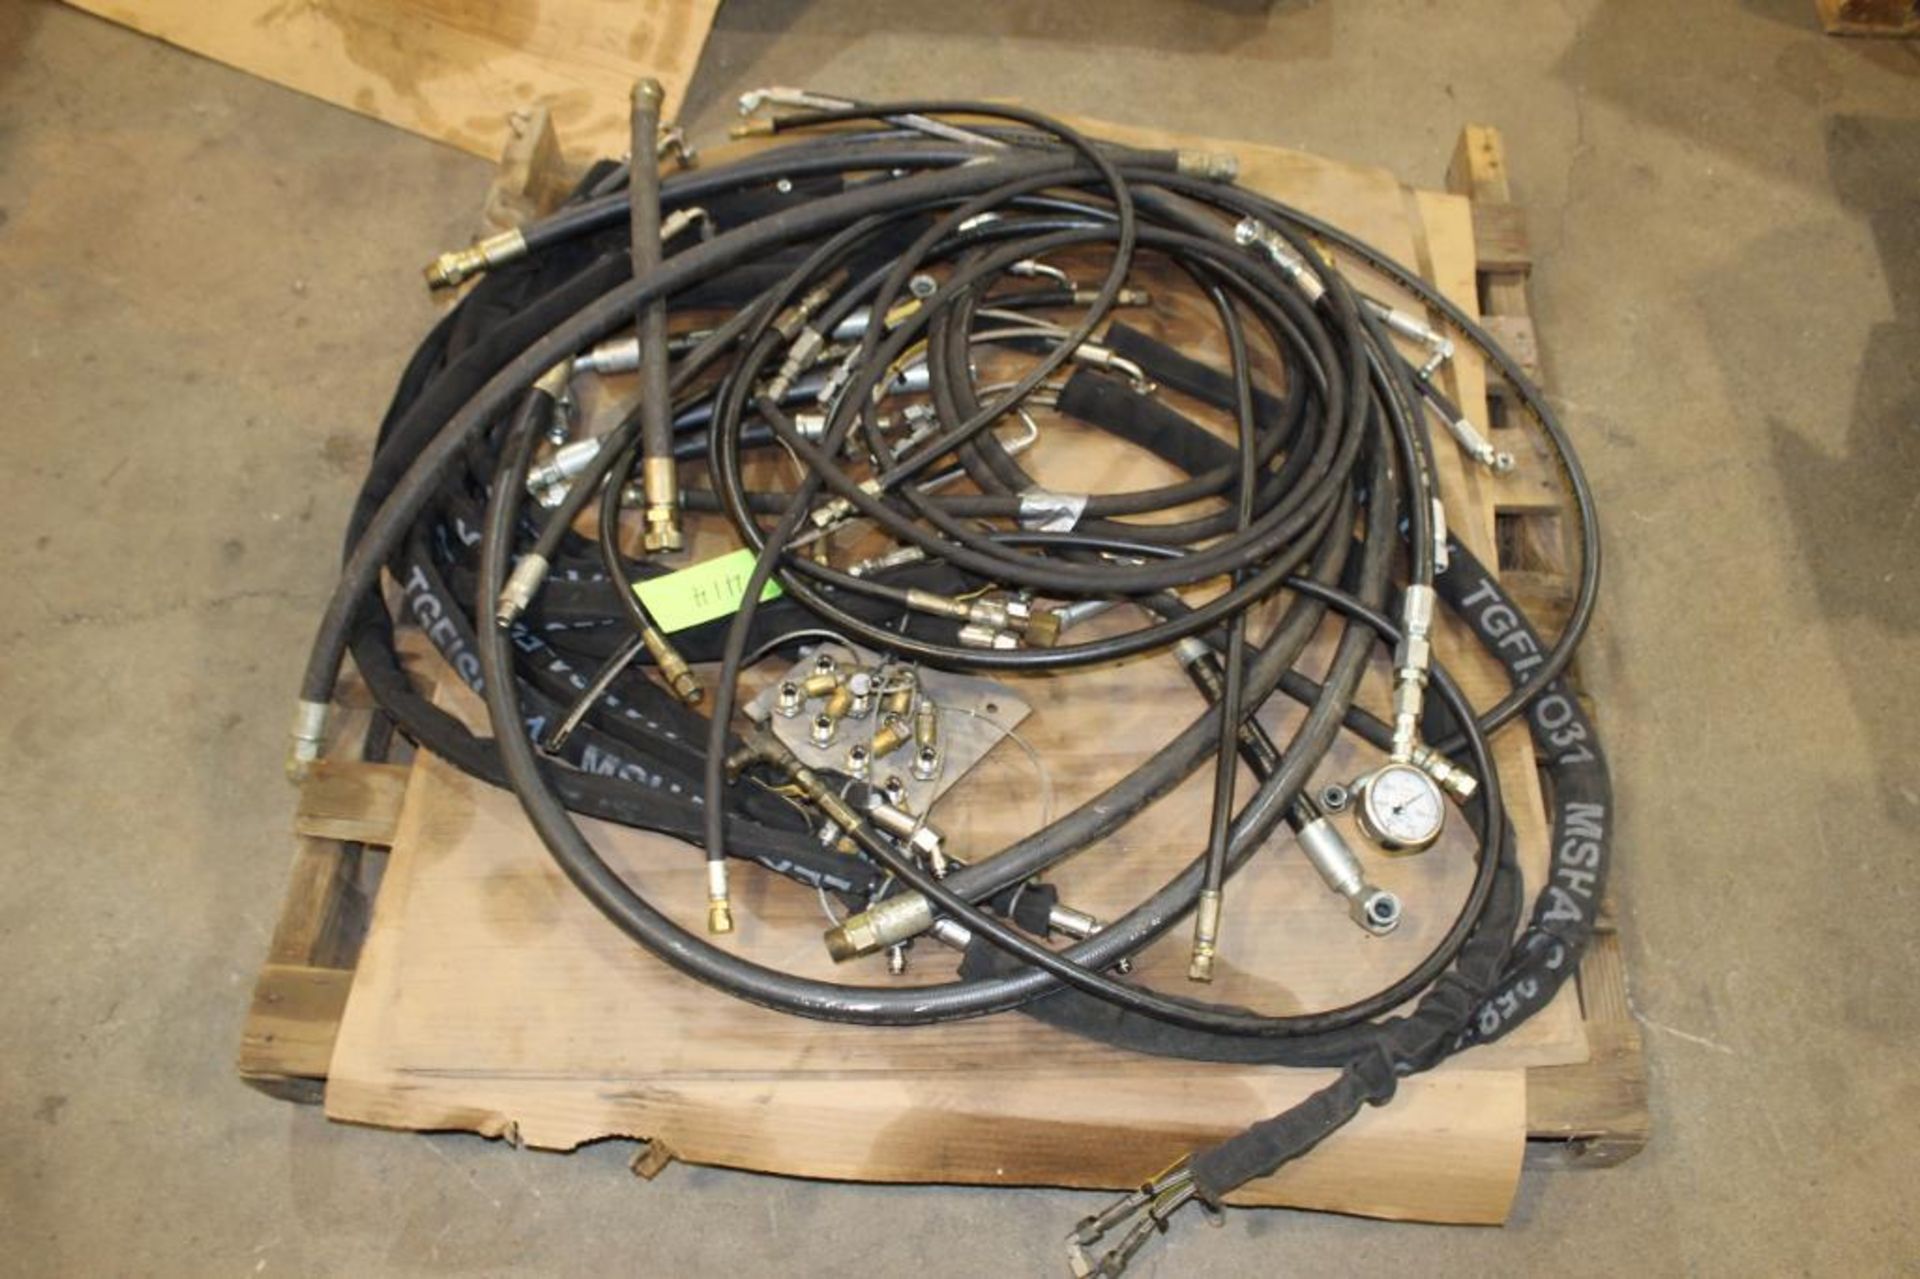 Lot of Assorted Parker Hydraulic Hoses - Image 6 of 10